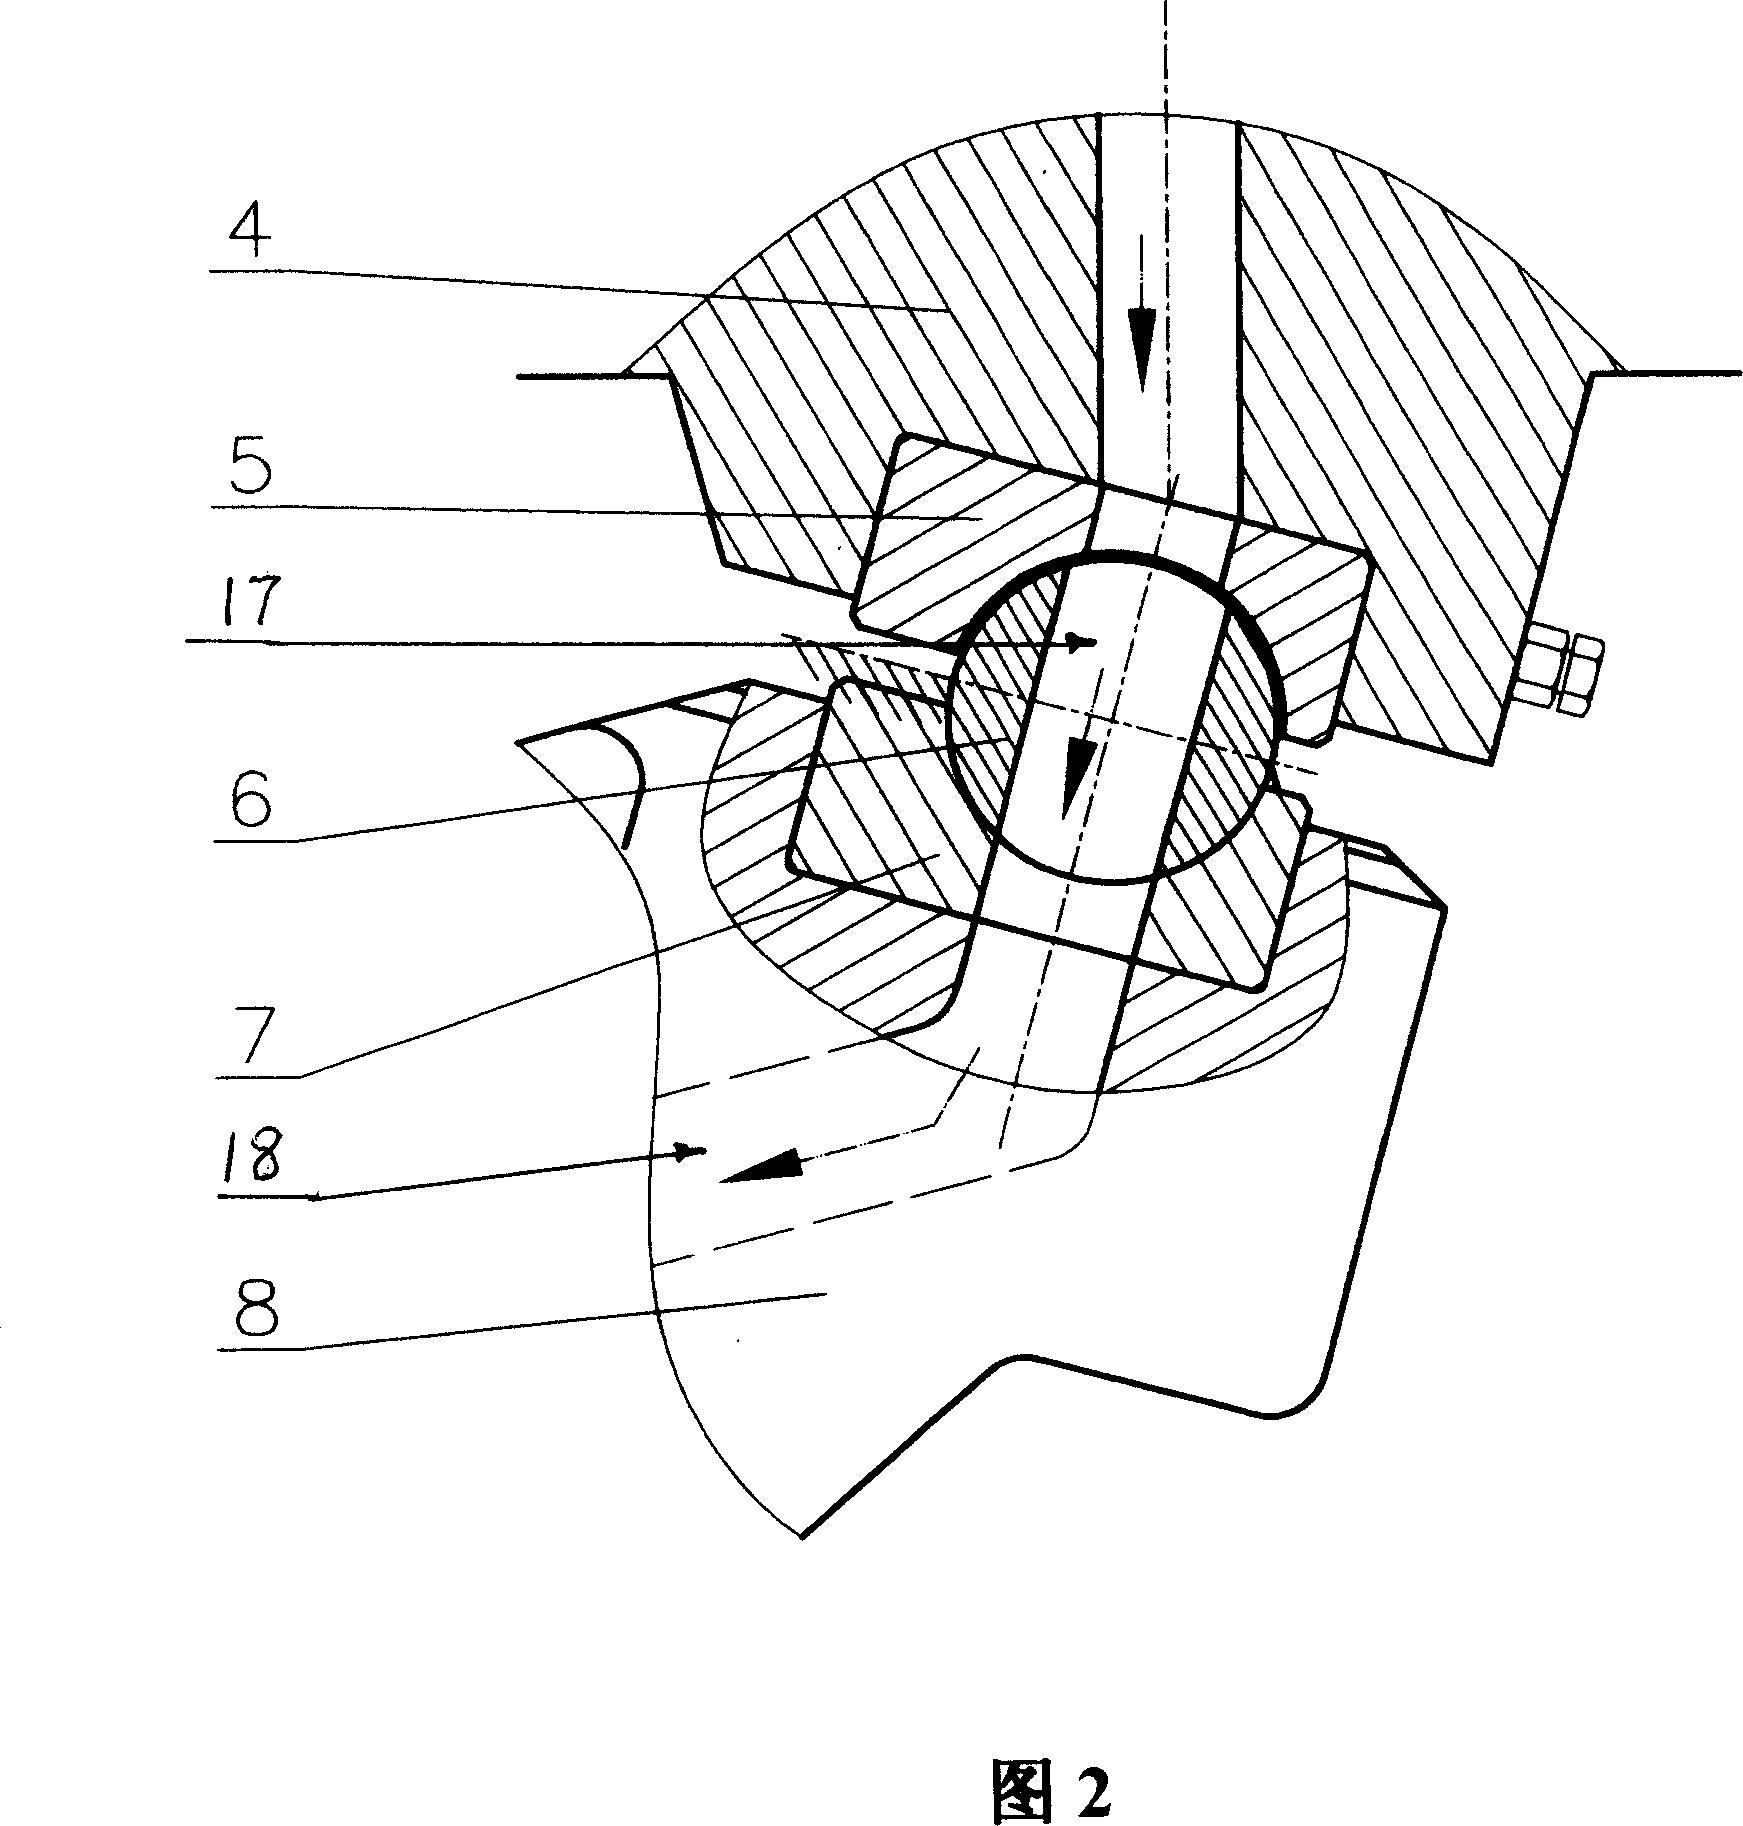 Enclosed air passage system for grinding roll